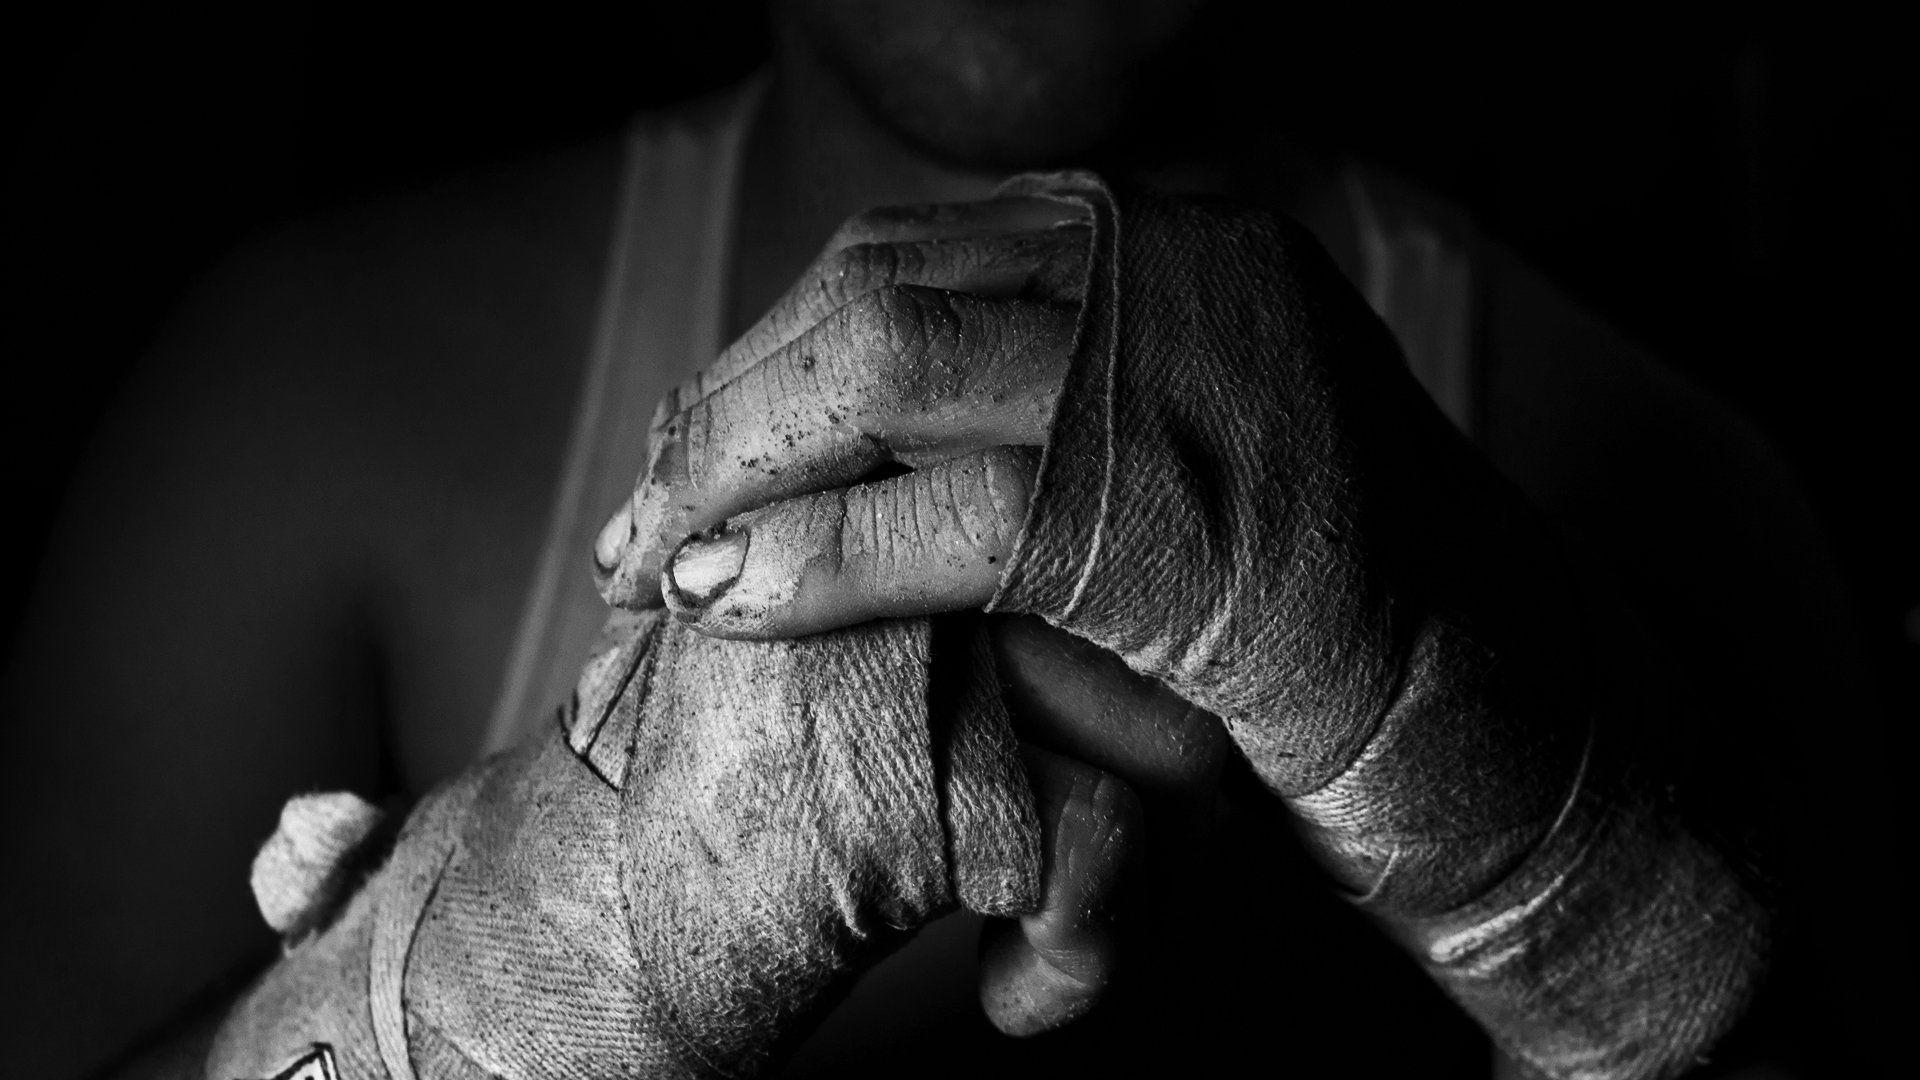 Boxing Gloves Wallpapers - Wallpaper Cave